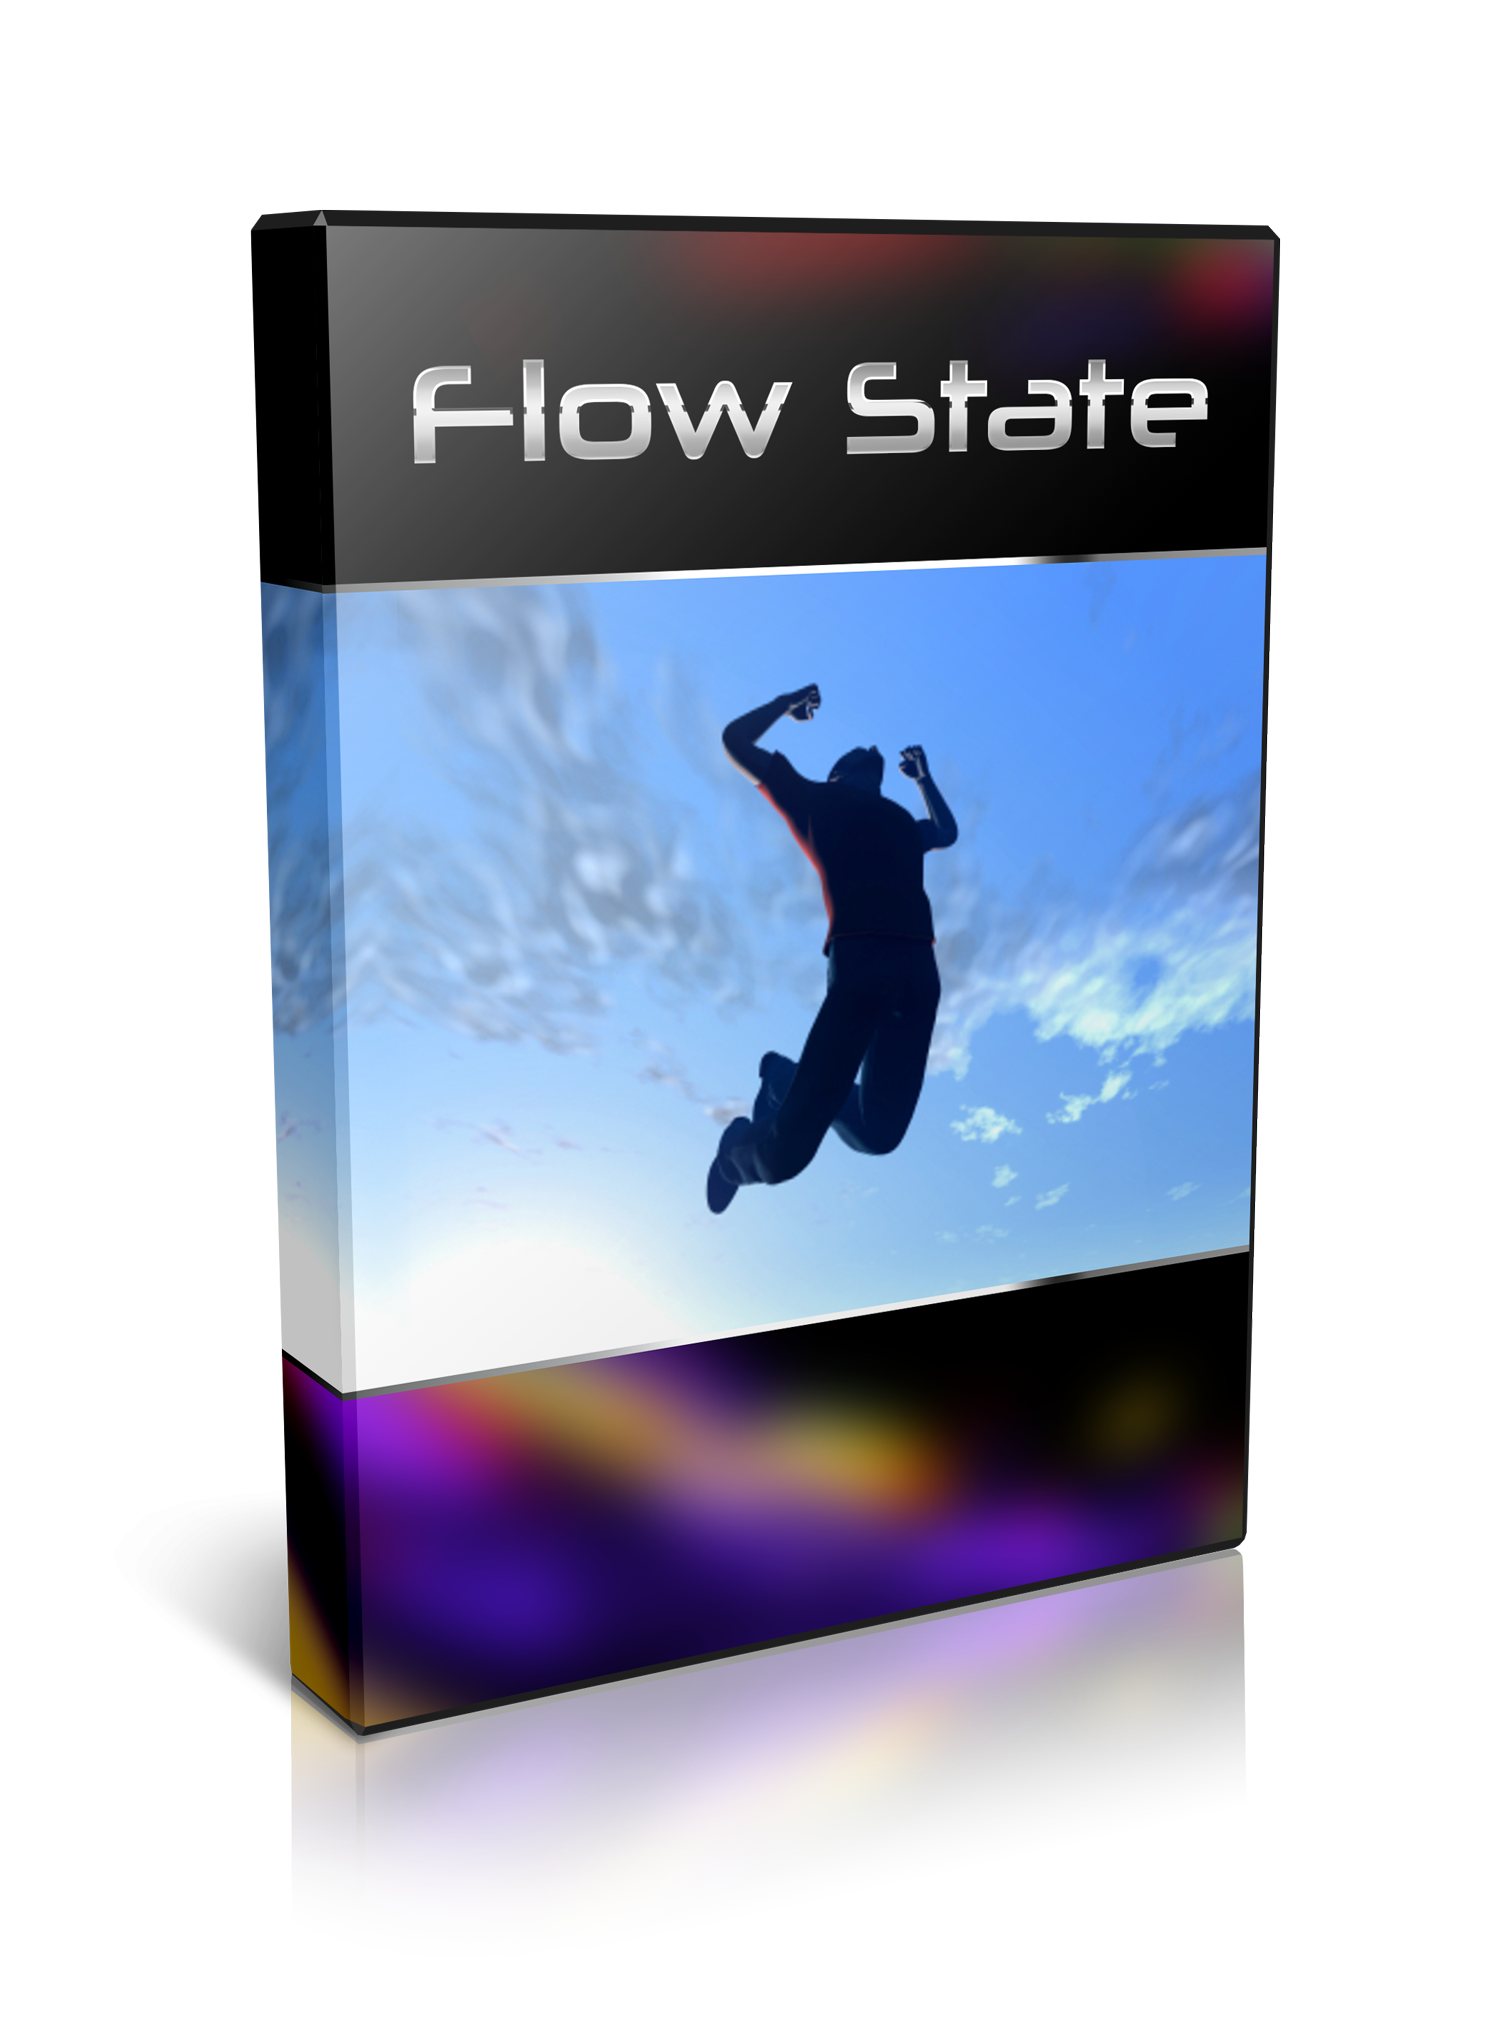 wallpaper for flowstate